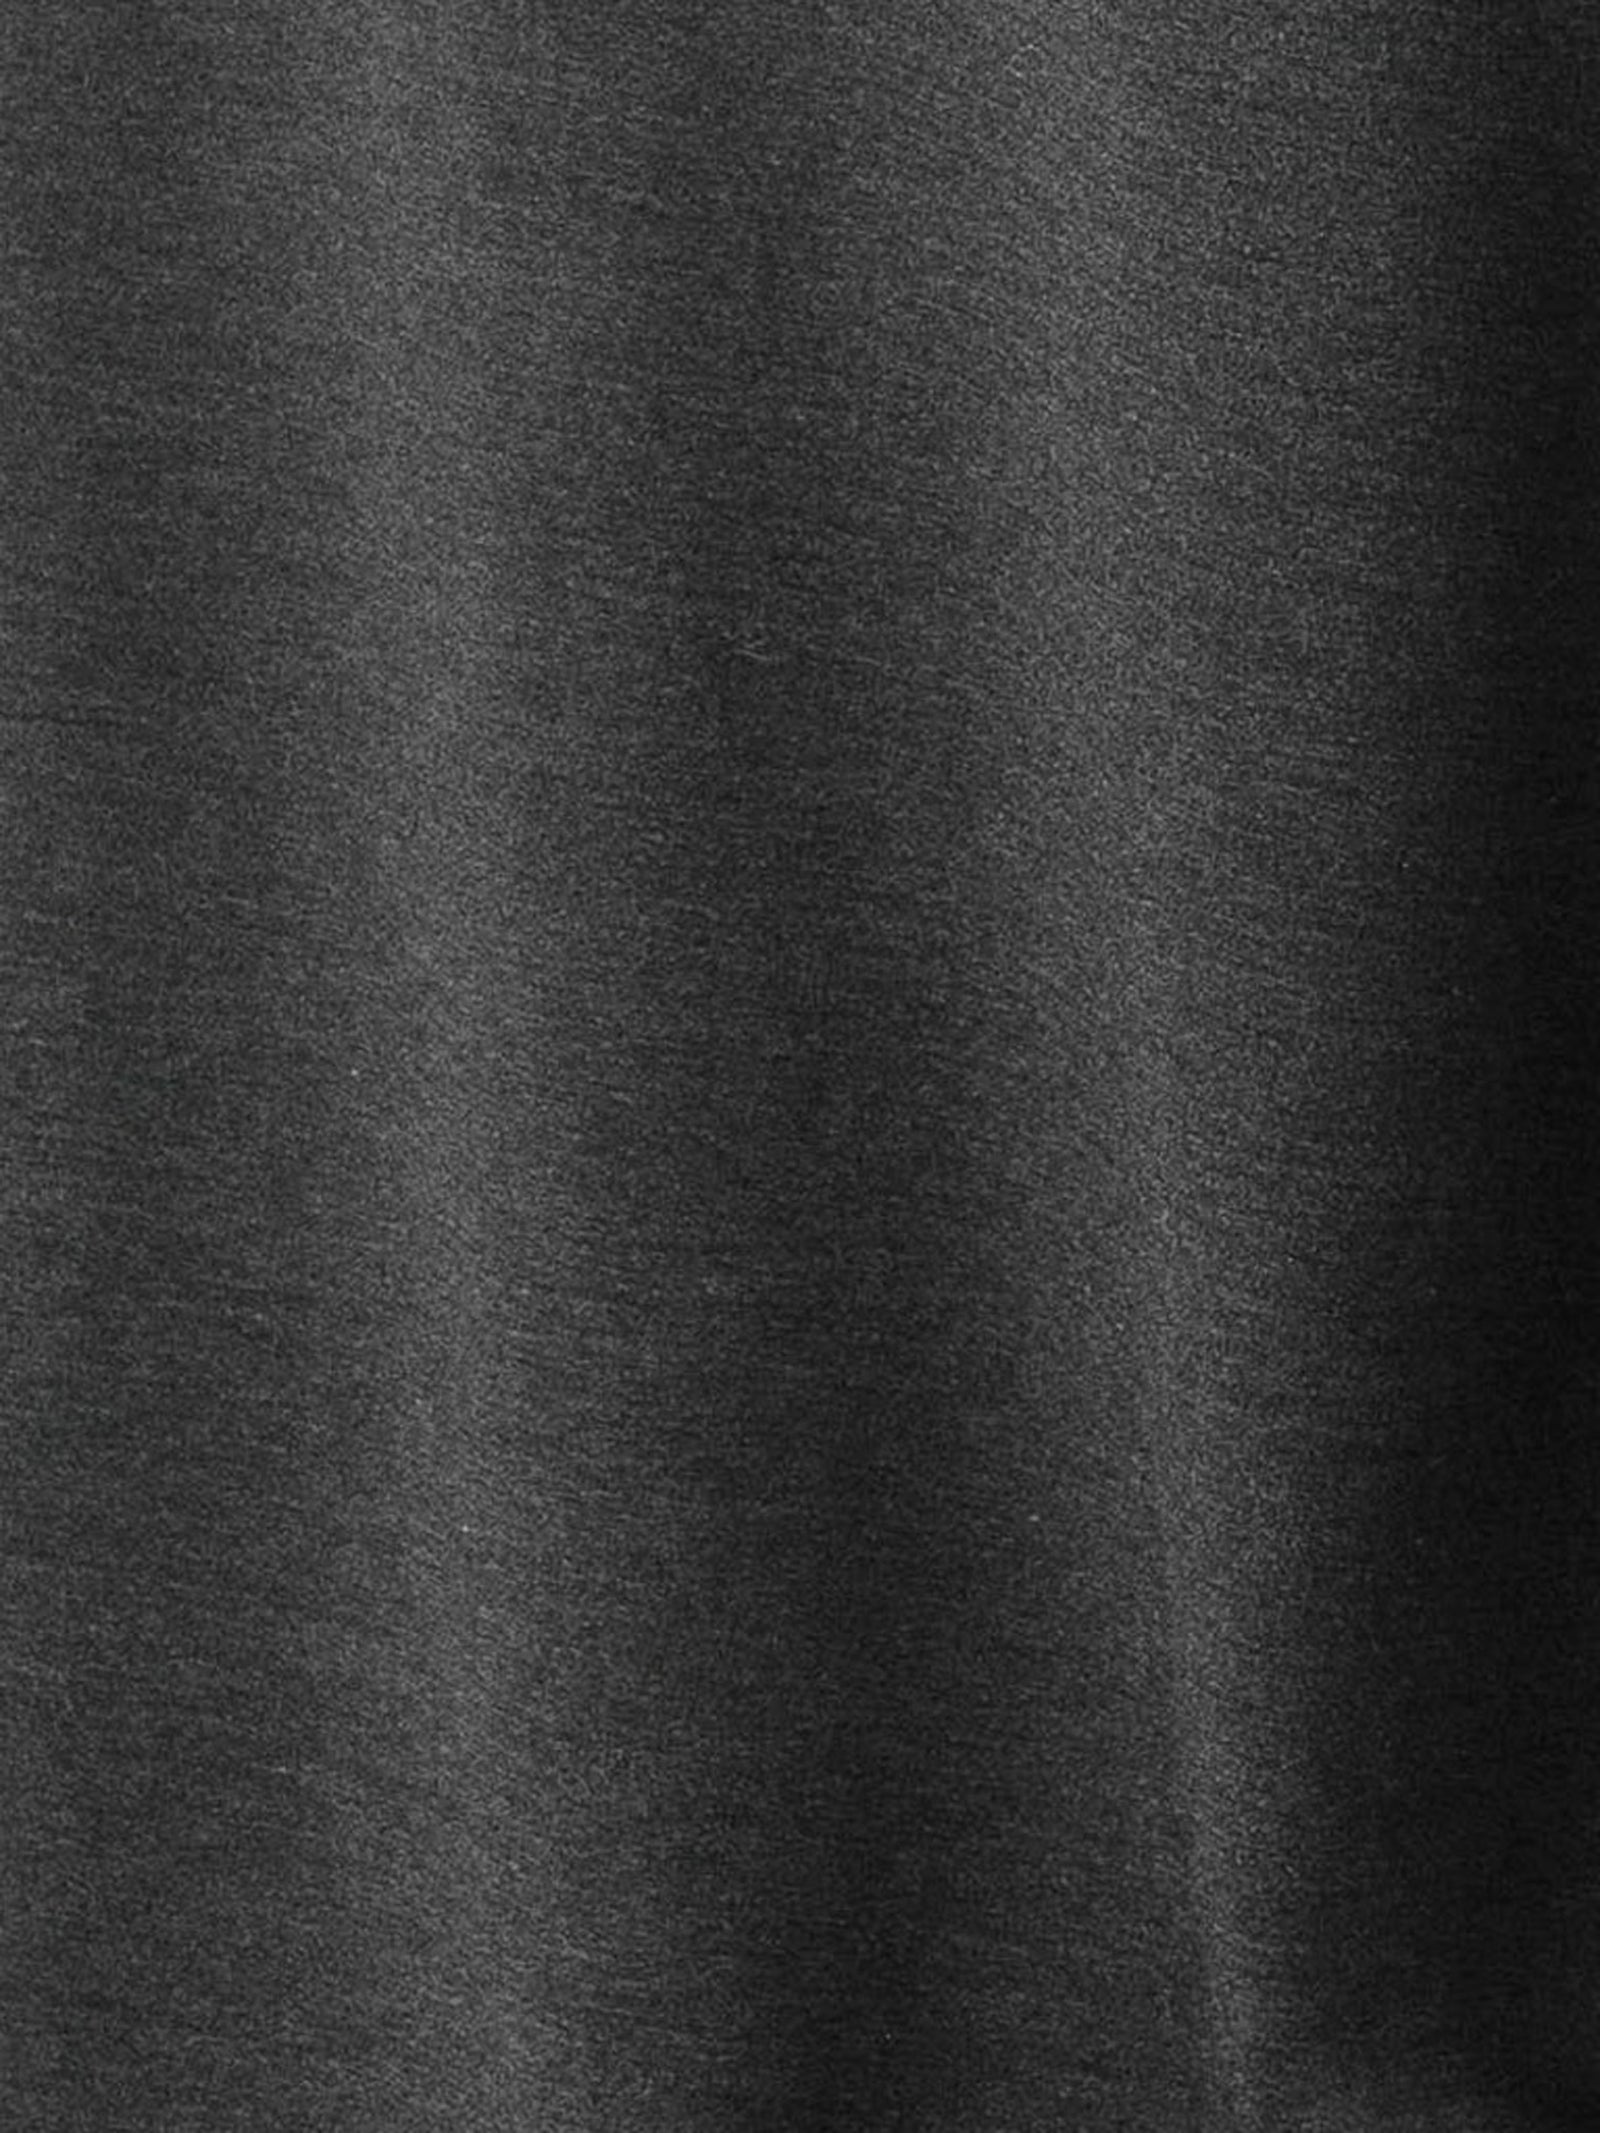 Charcoal Bamboo Hoodie. Photo of hoodie taken close up to show the material.